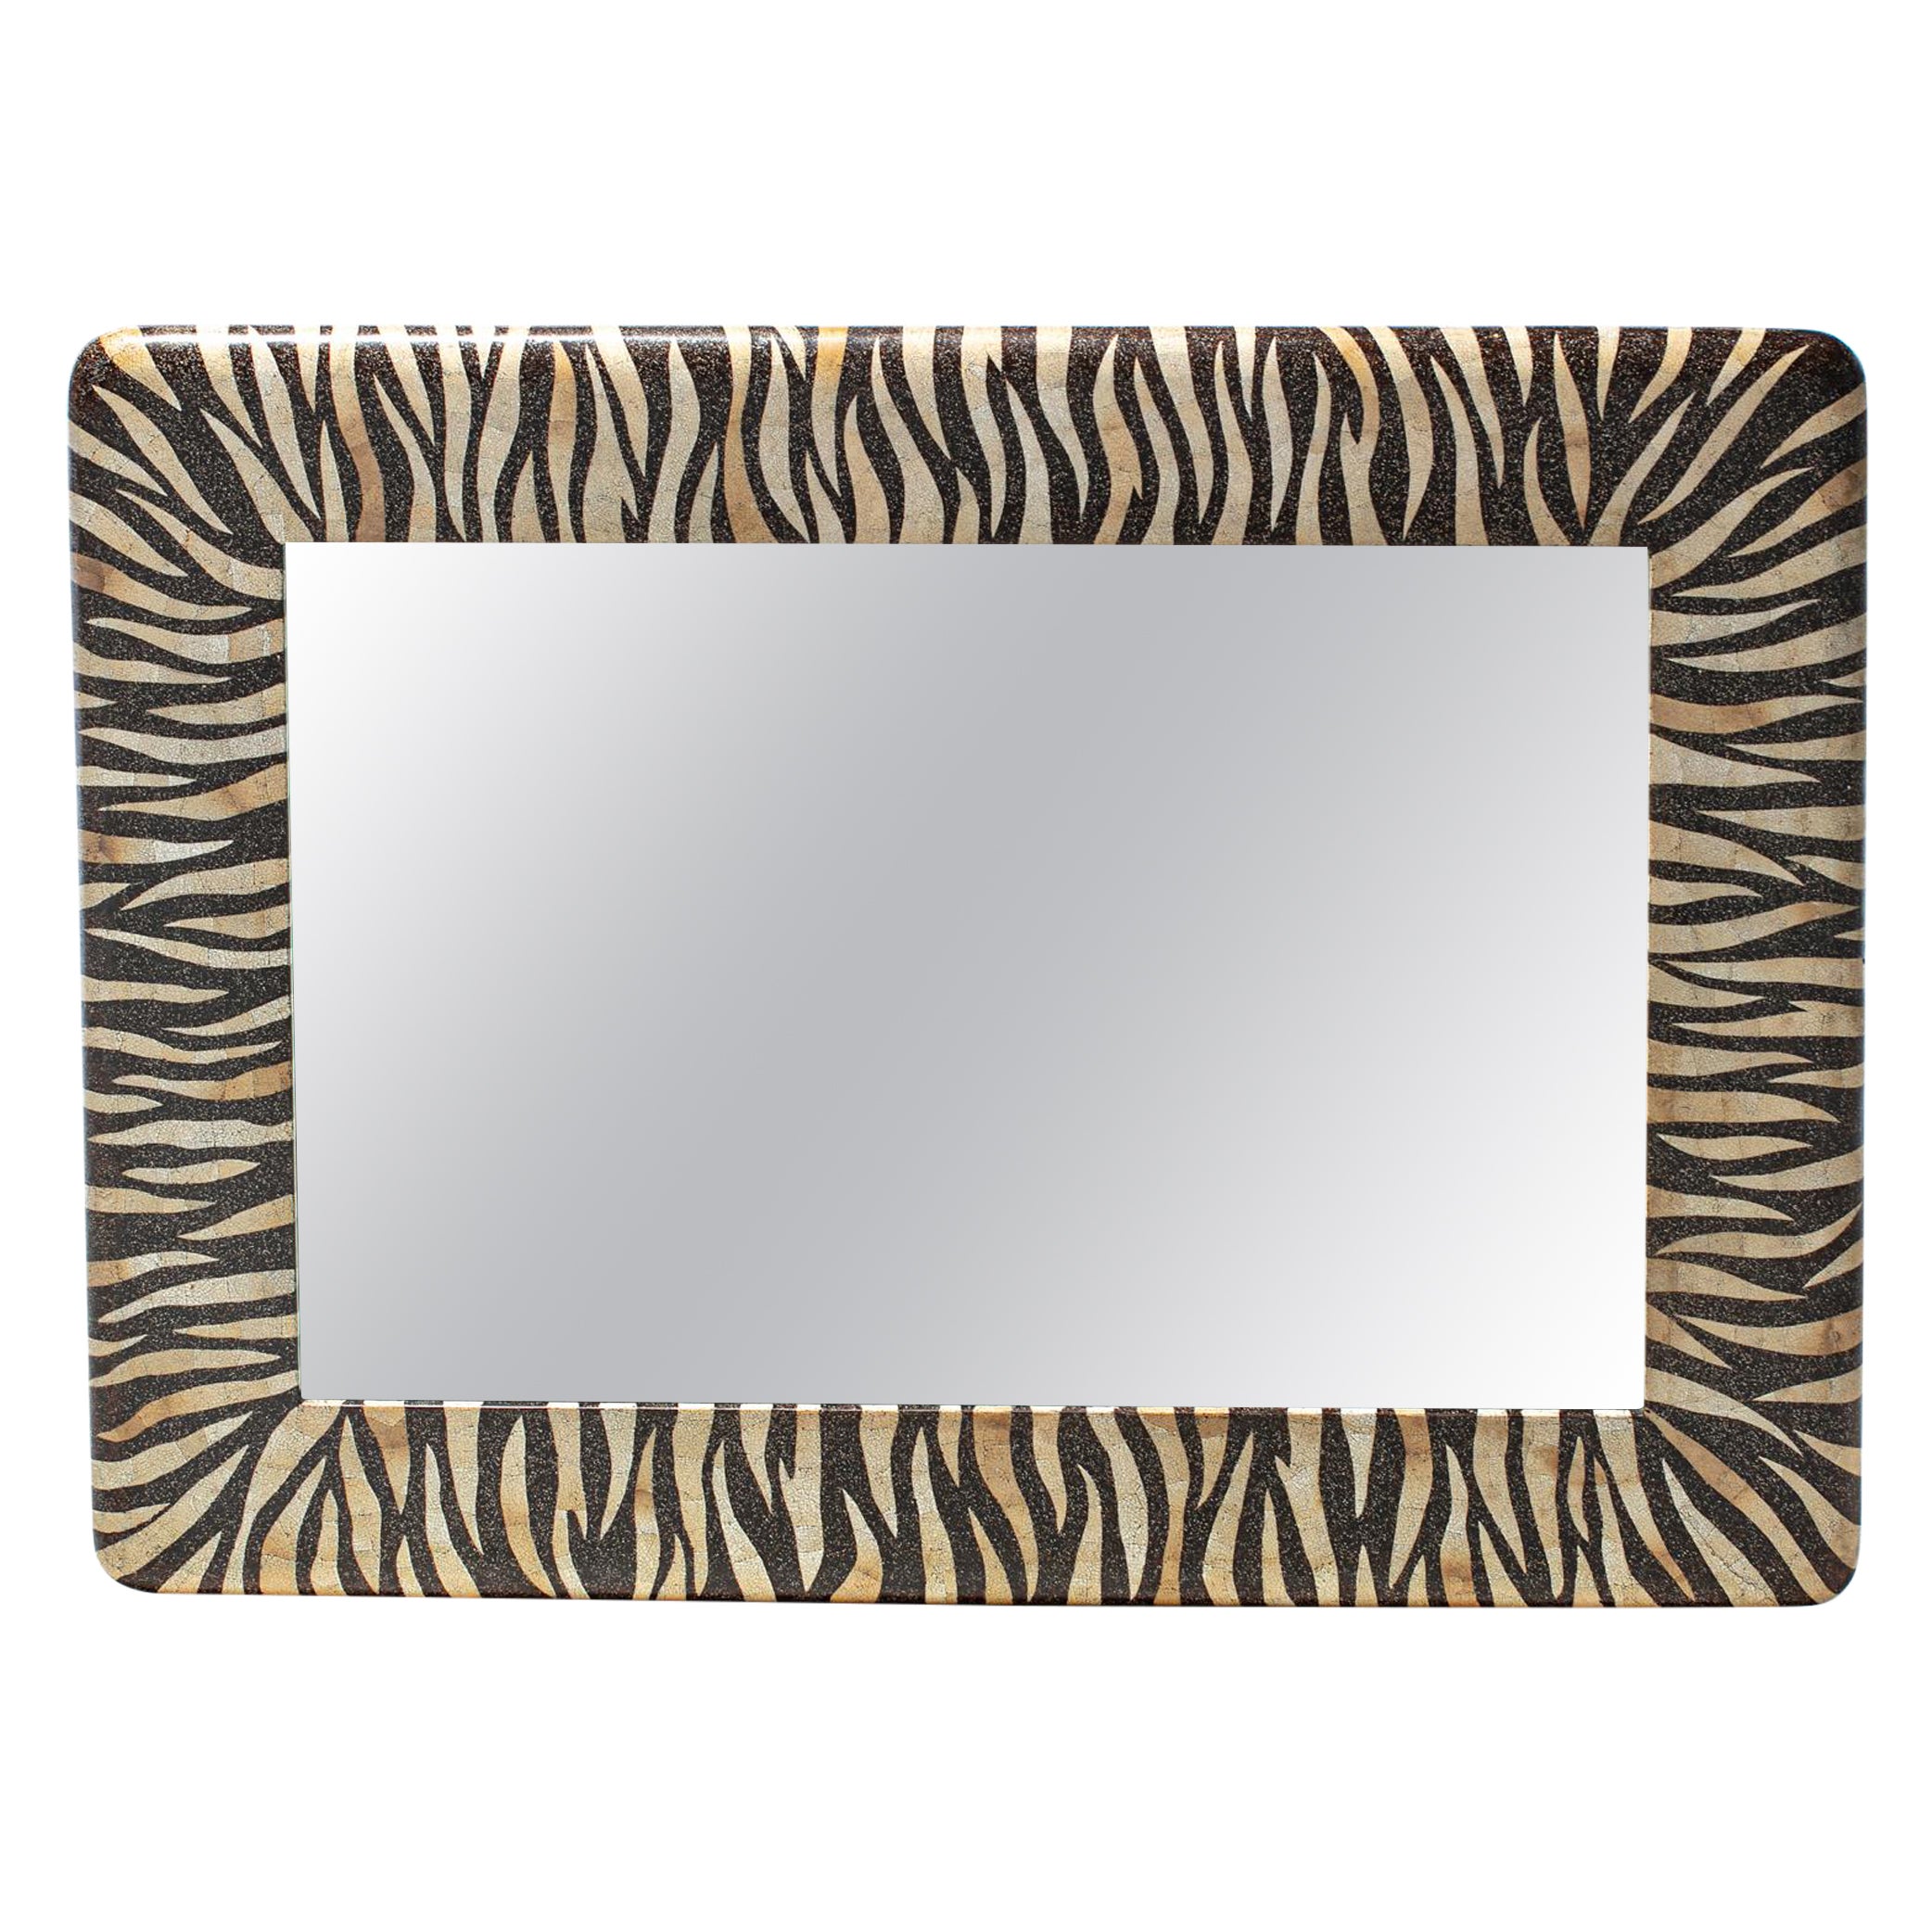 Hand Made Zebra Pattern Mirror Made of Eggshells by Maitland Smith For Sale